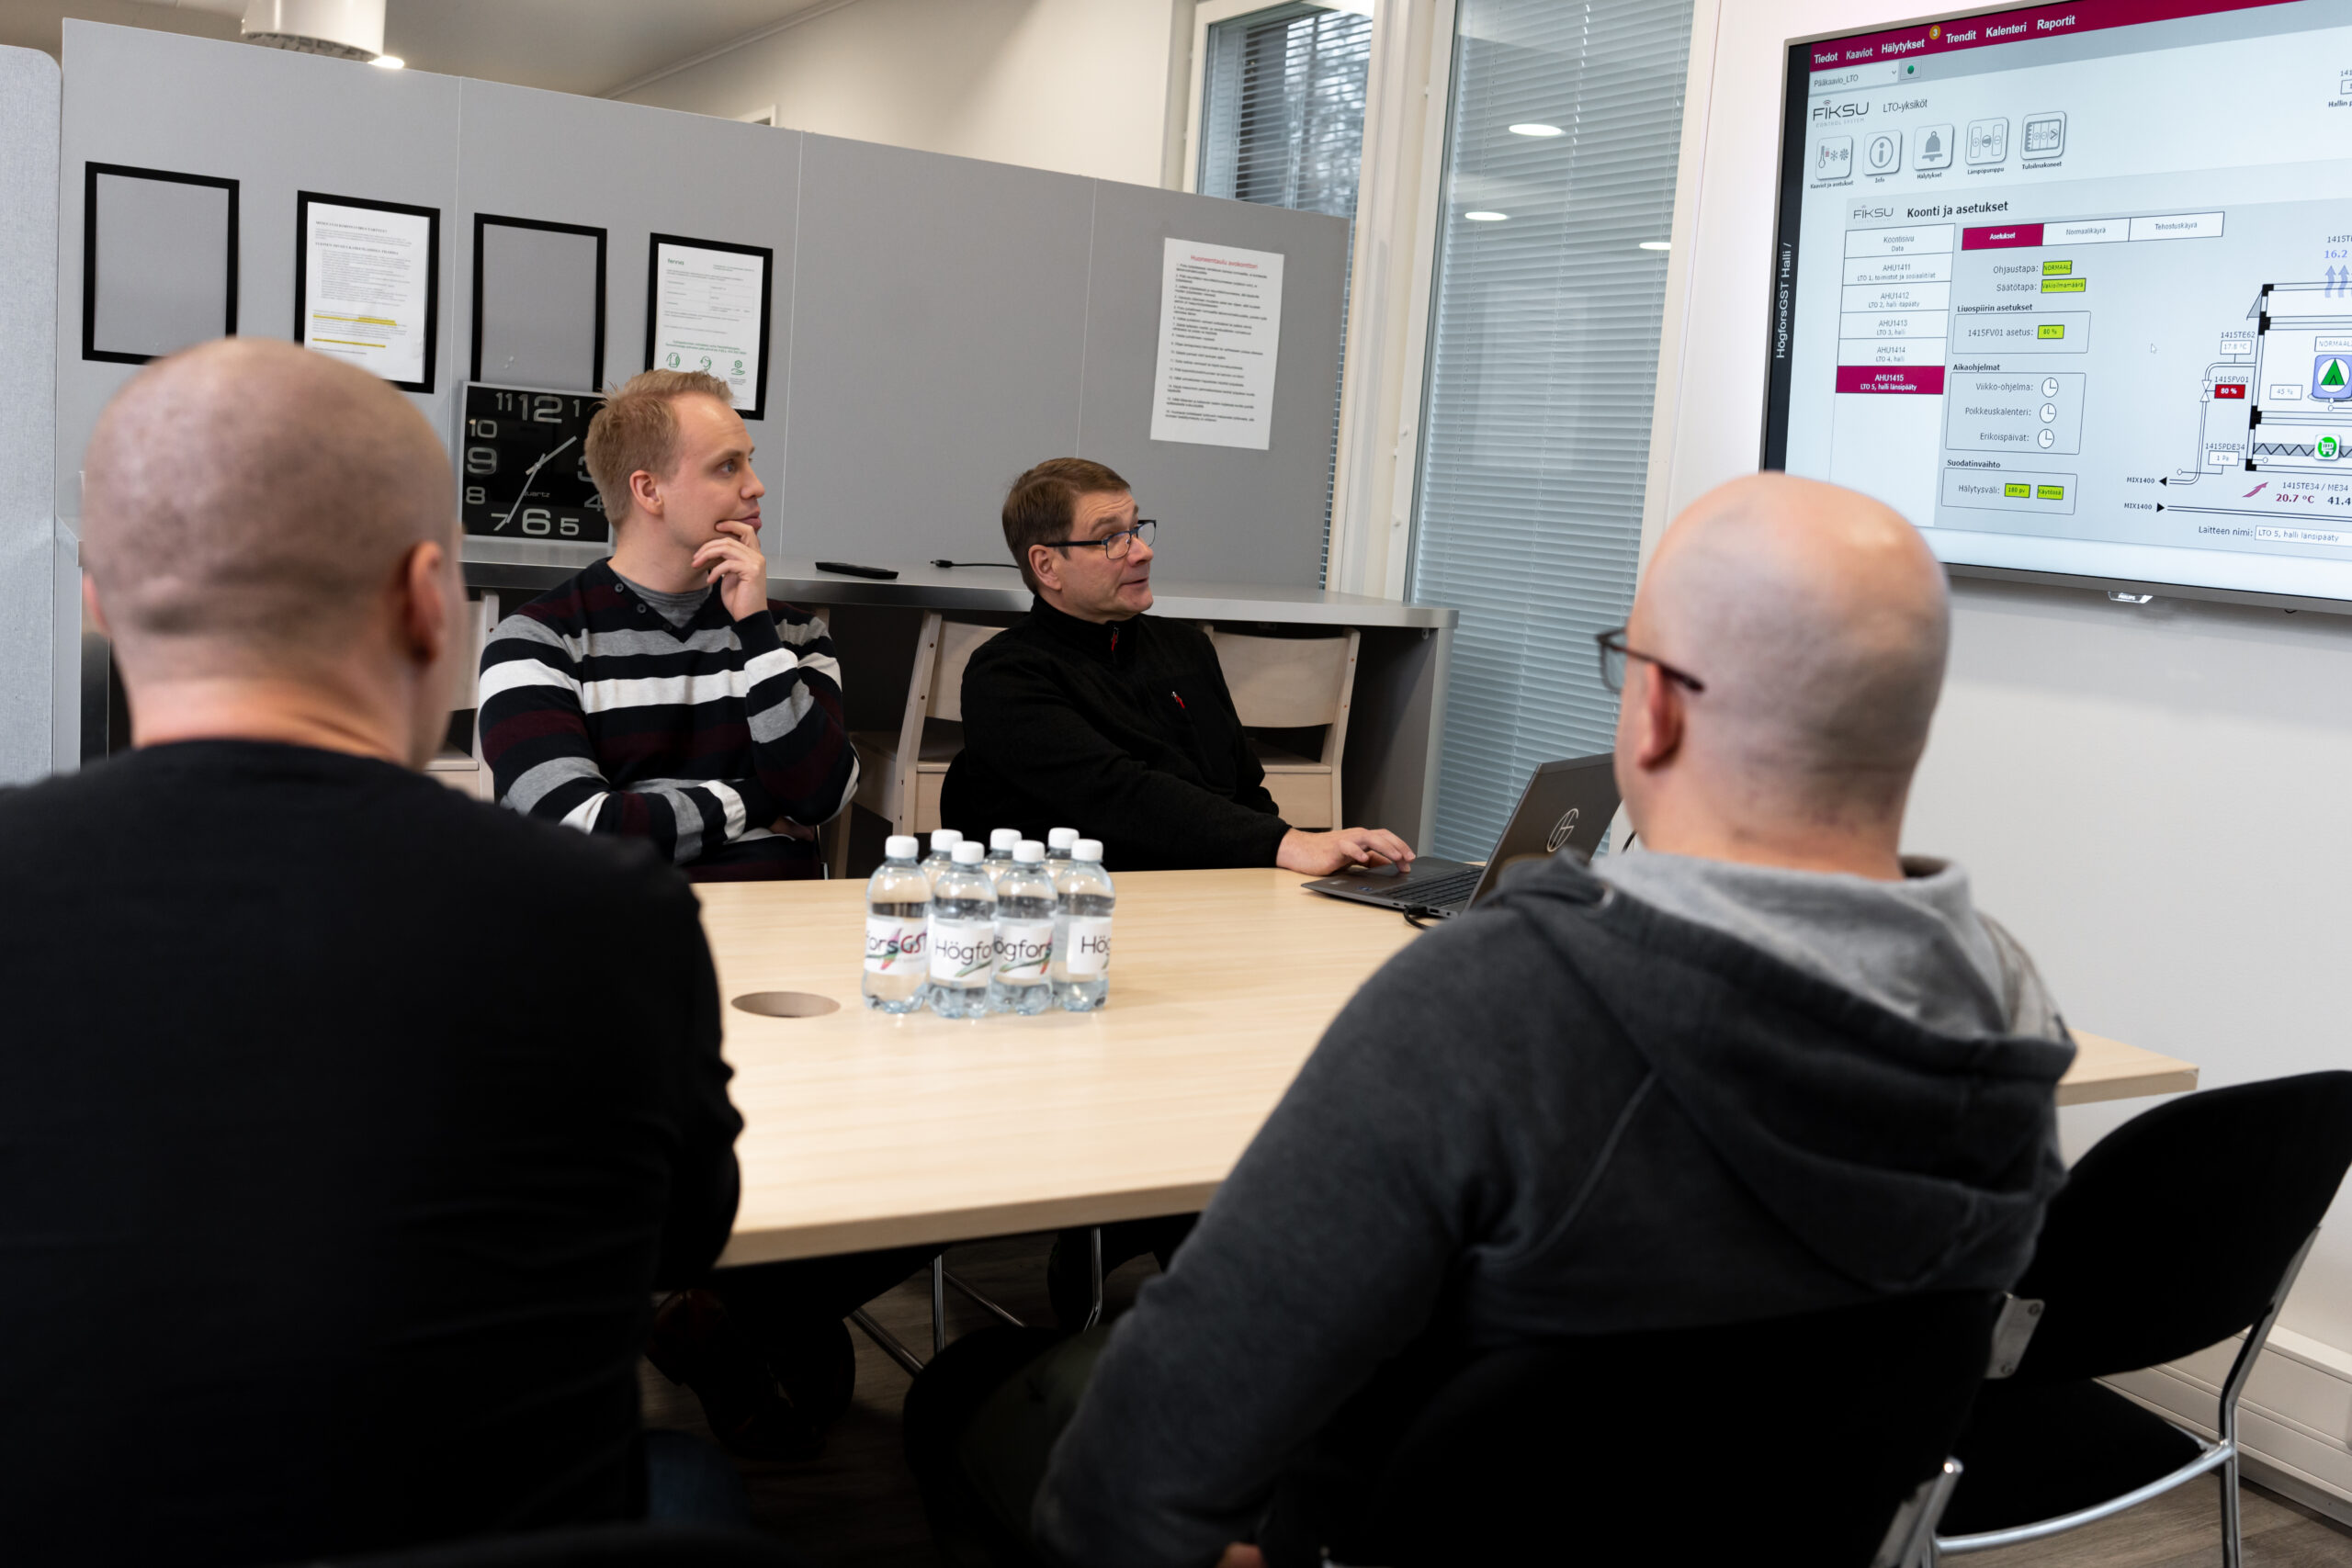 Four men in a meeting looking at HögforsGST's Fiksu Control system presented on a screen